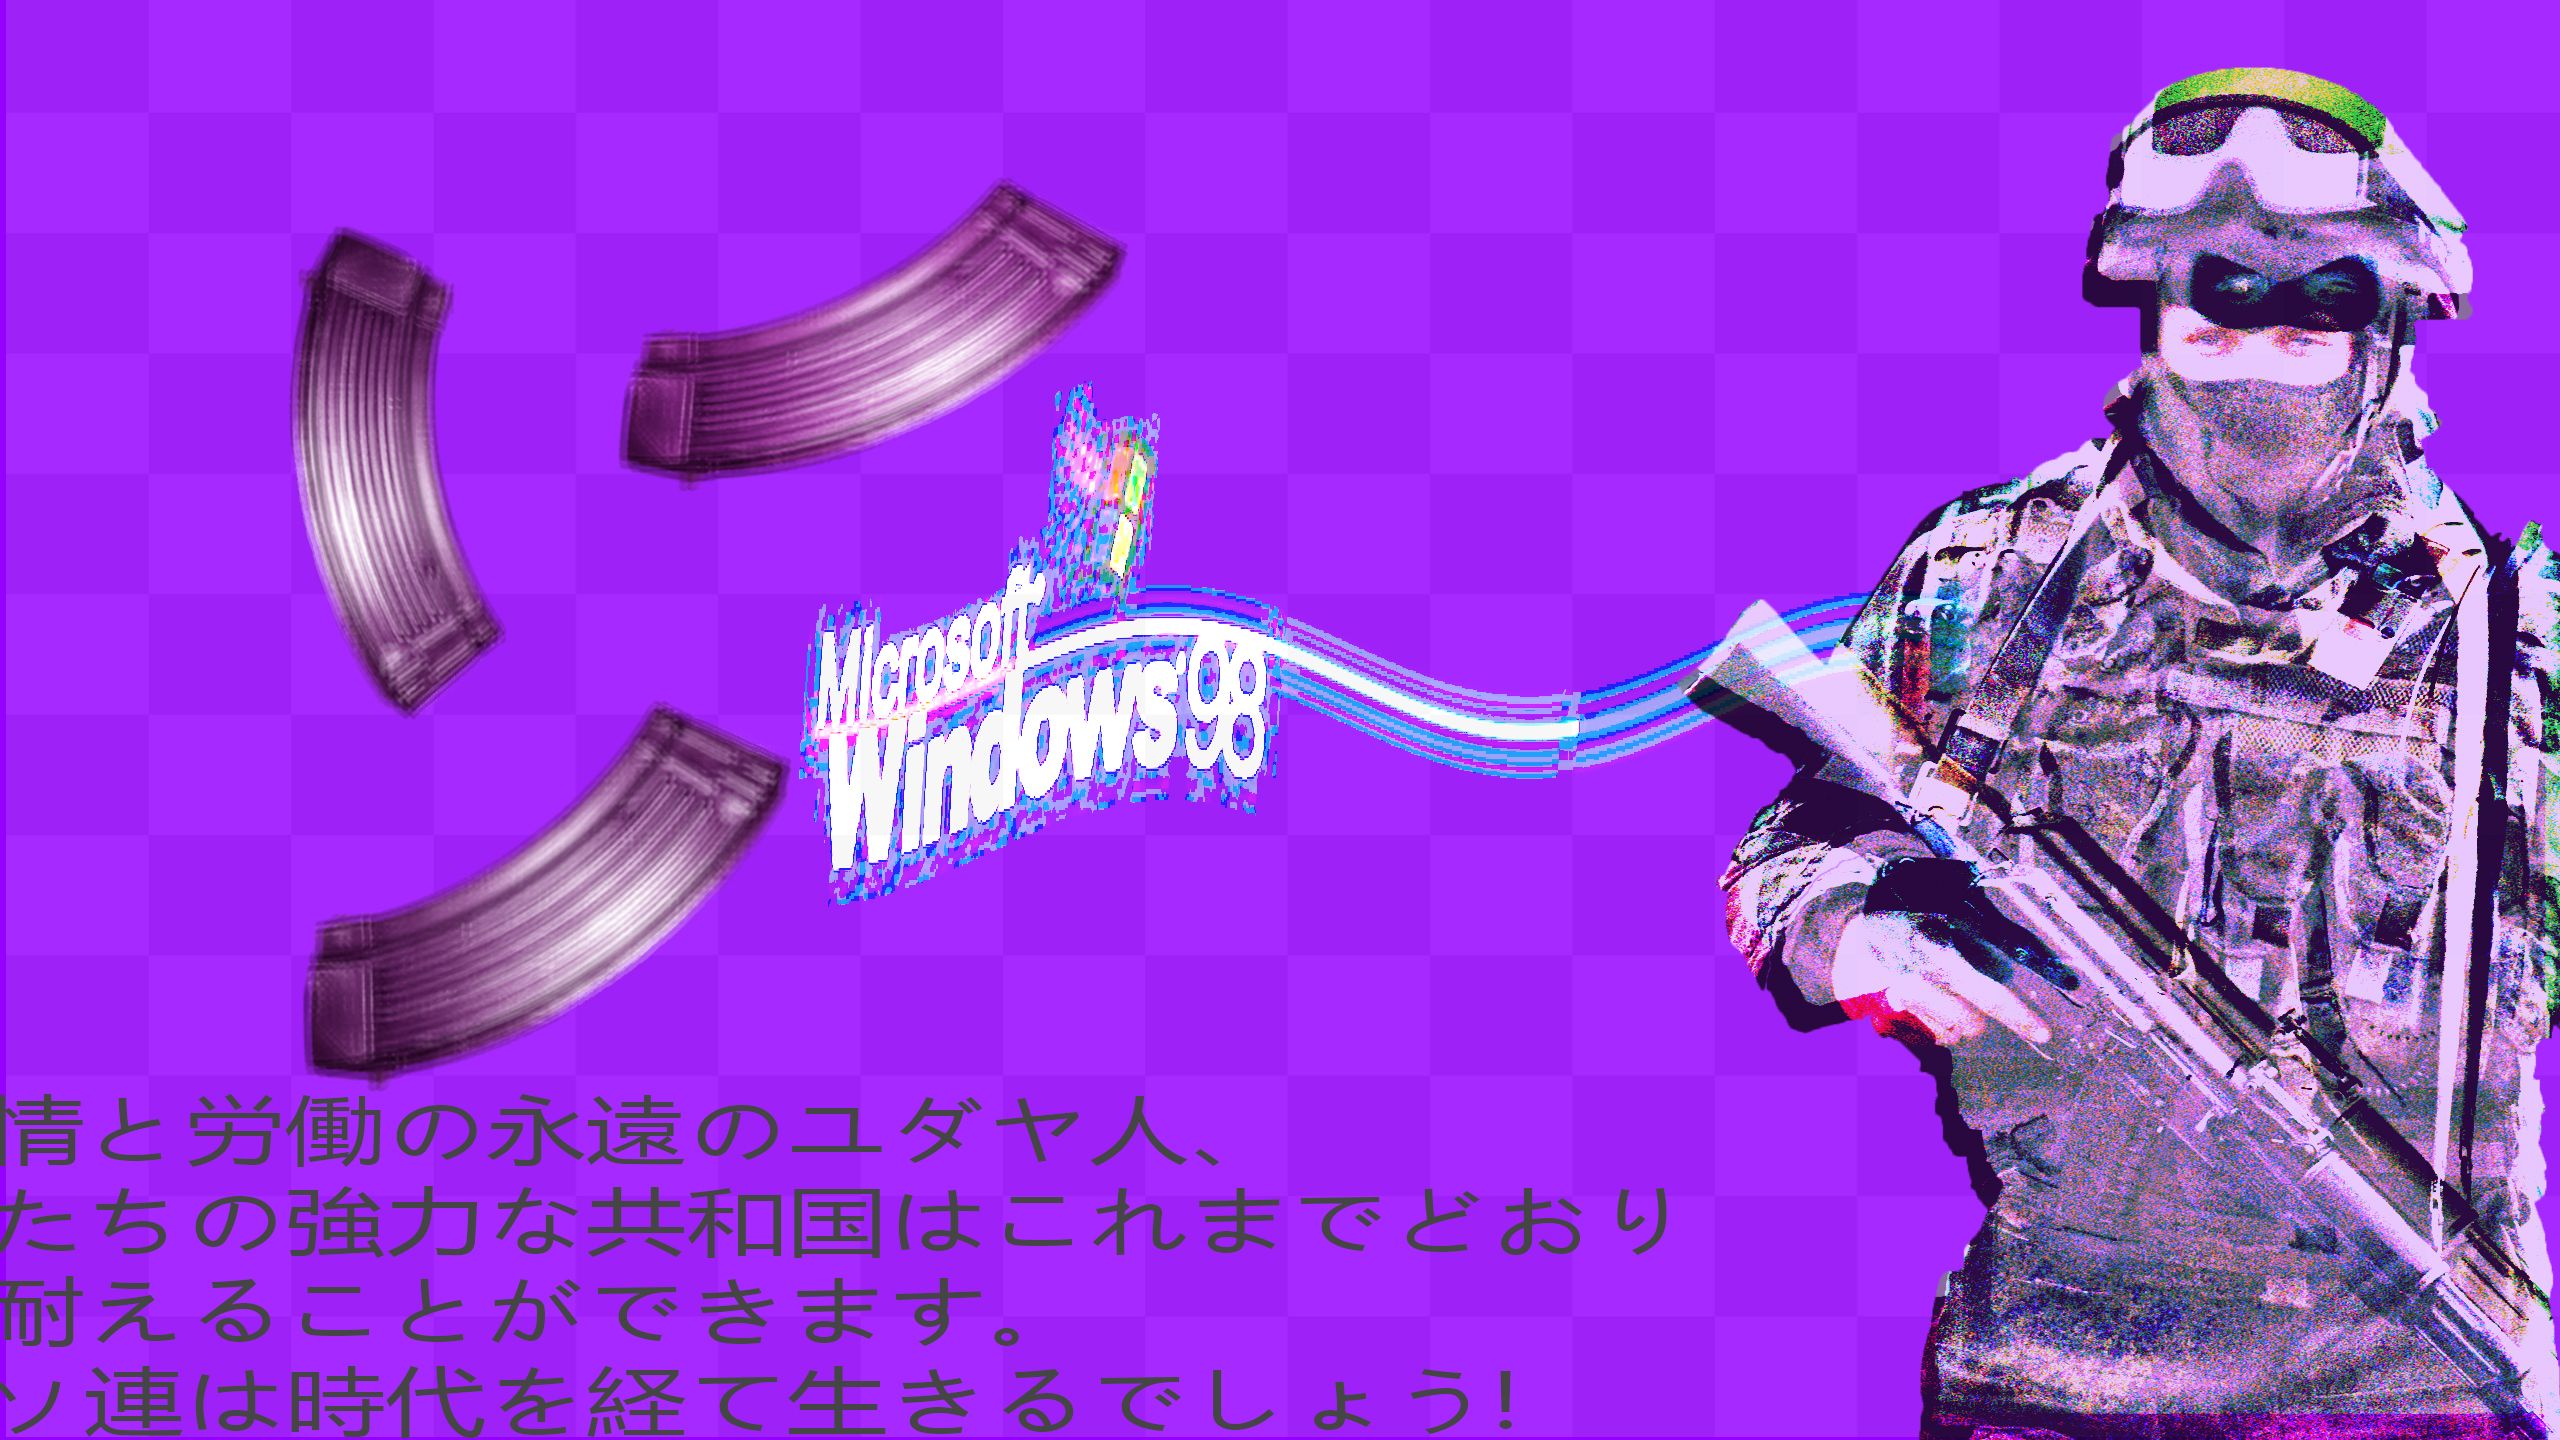 A purple background with an image of the character - Windows 98